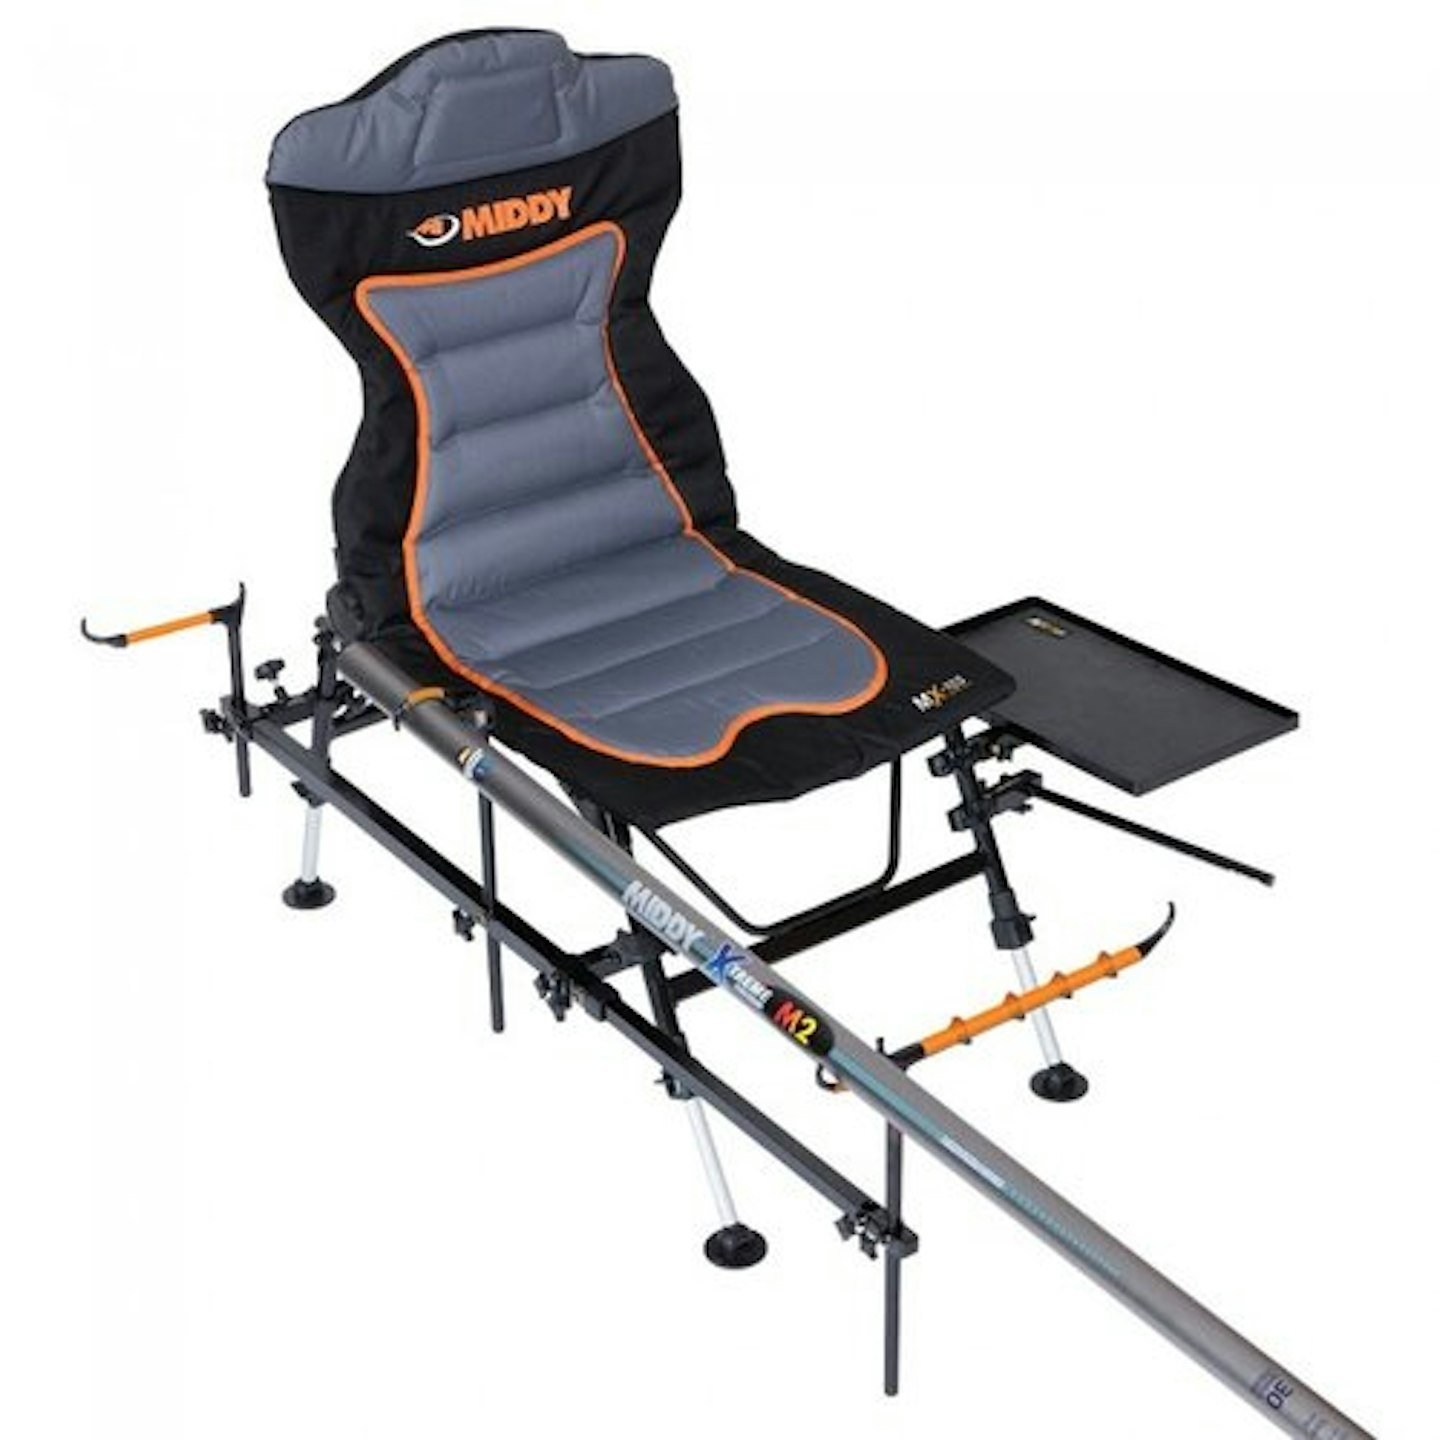 Middy_MX-100_Pole_Feeder_Recliner_Chair_Full_Package_1.jpg 